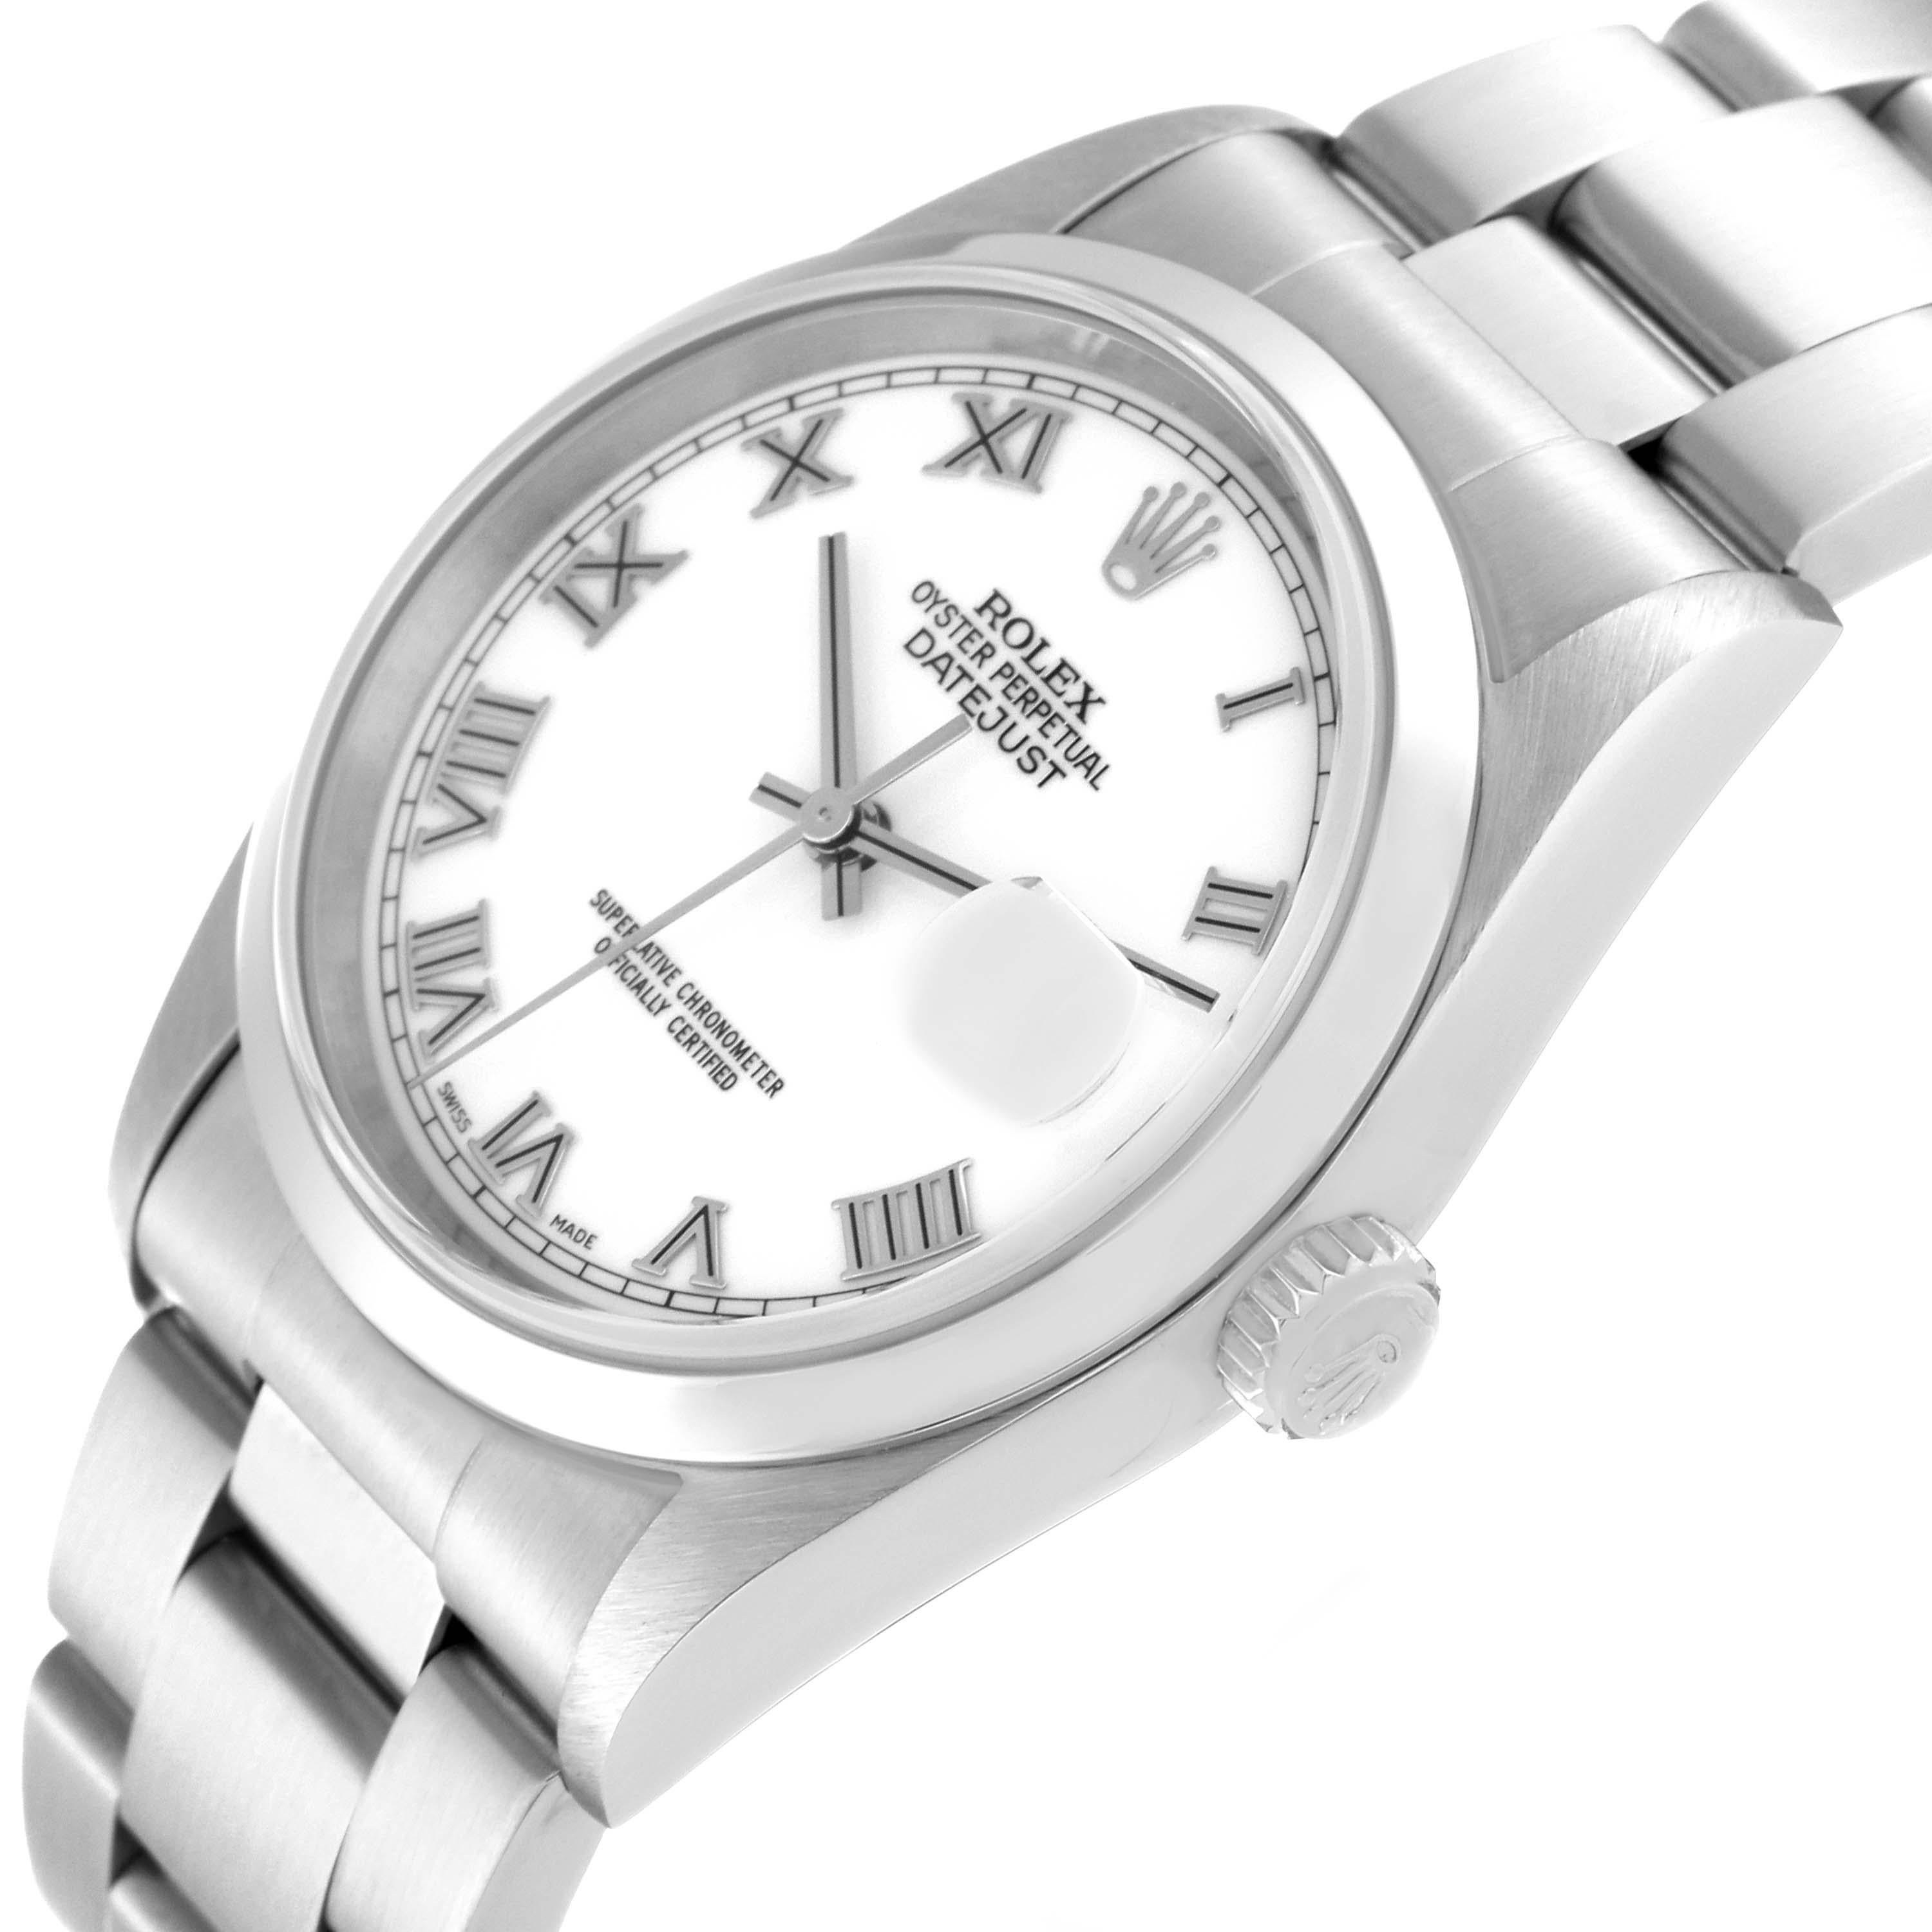 Rolex Datejust White Dial Smooth Bezel Steel Mens Watch 16200 Box Papers For Sale 4